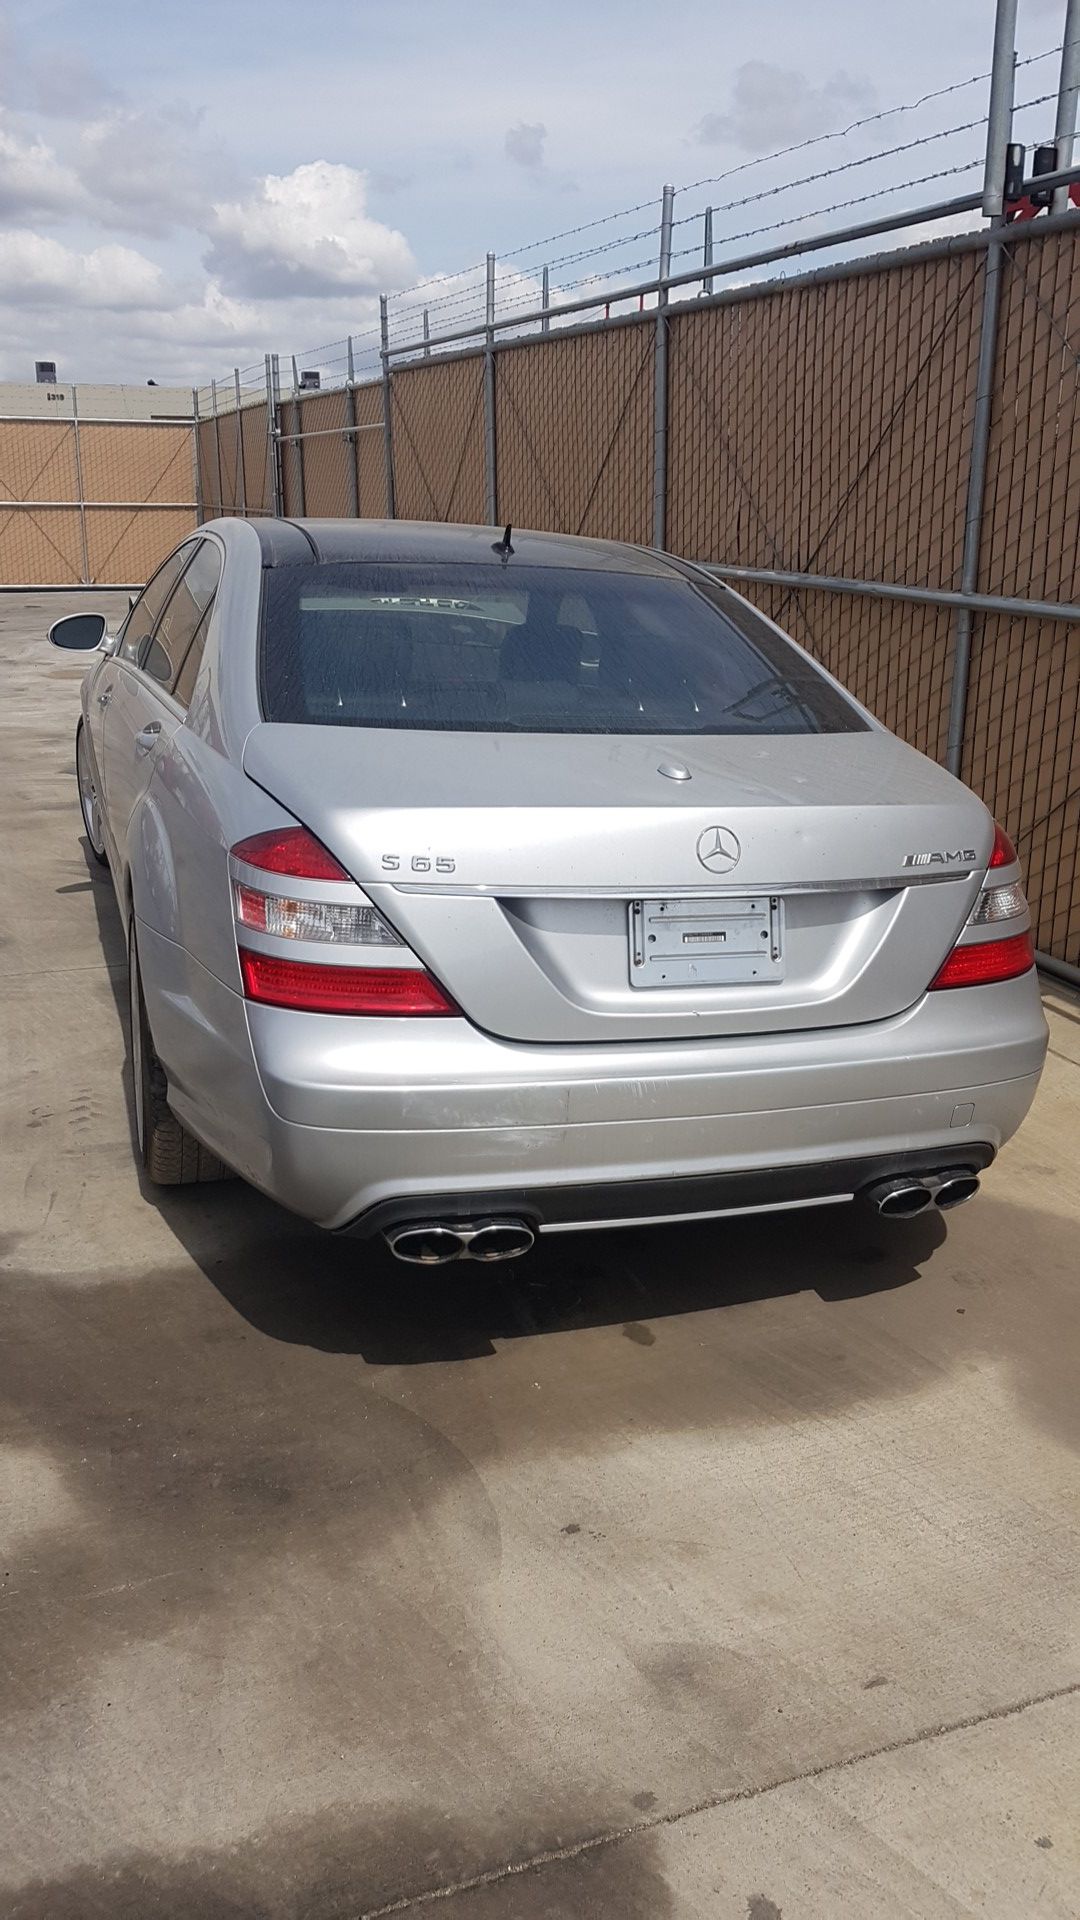 2007 Mercedes S65 AMG w221 parts out